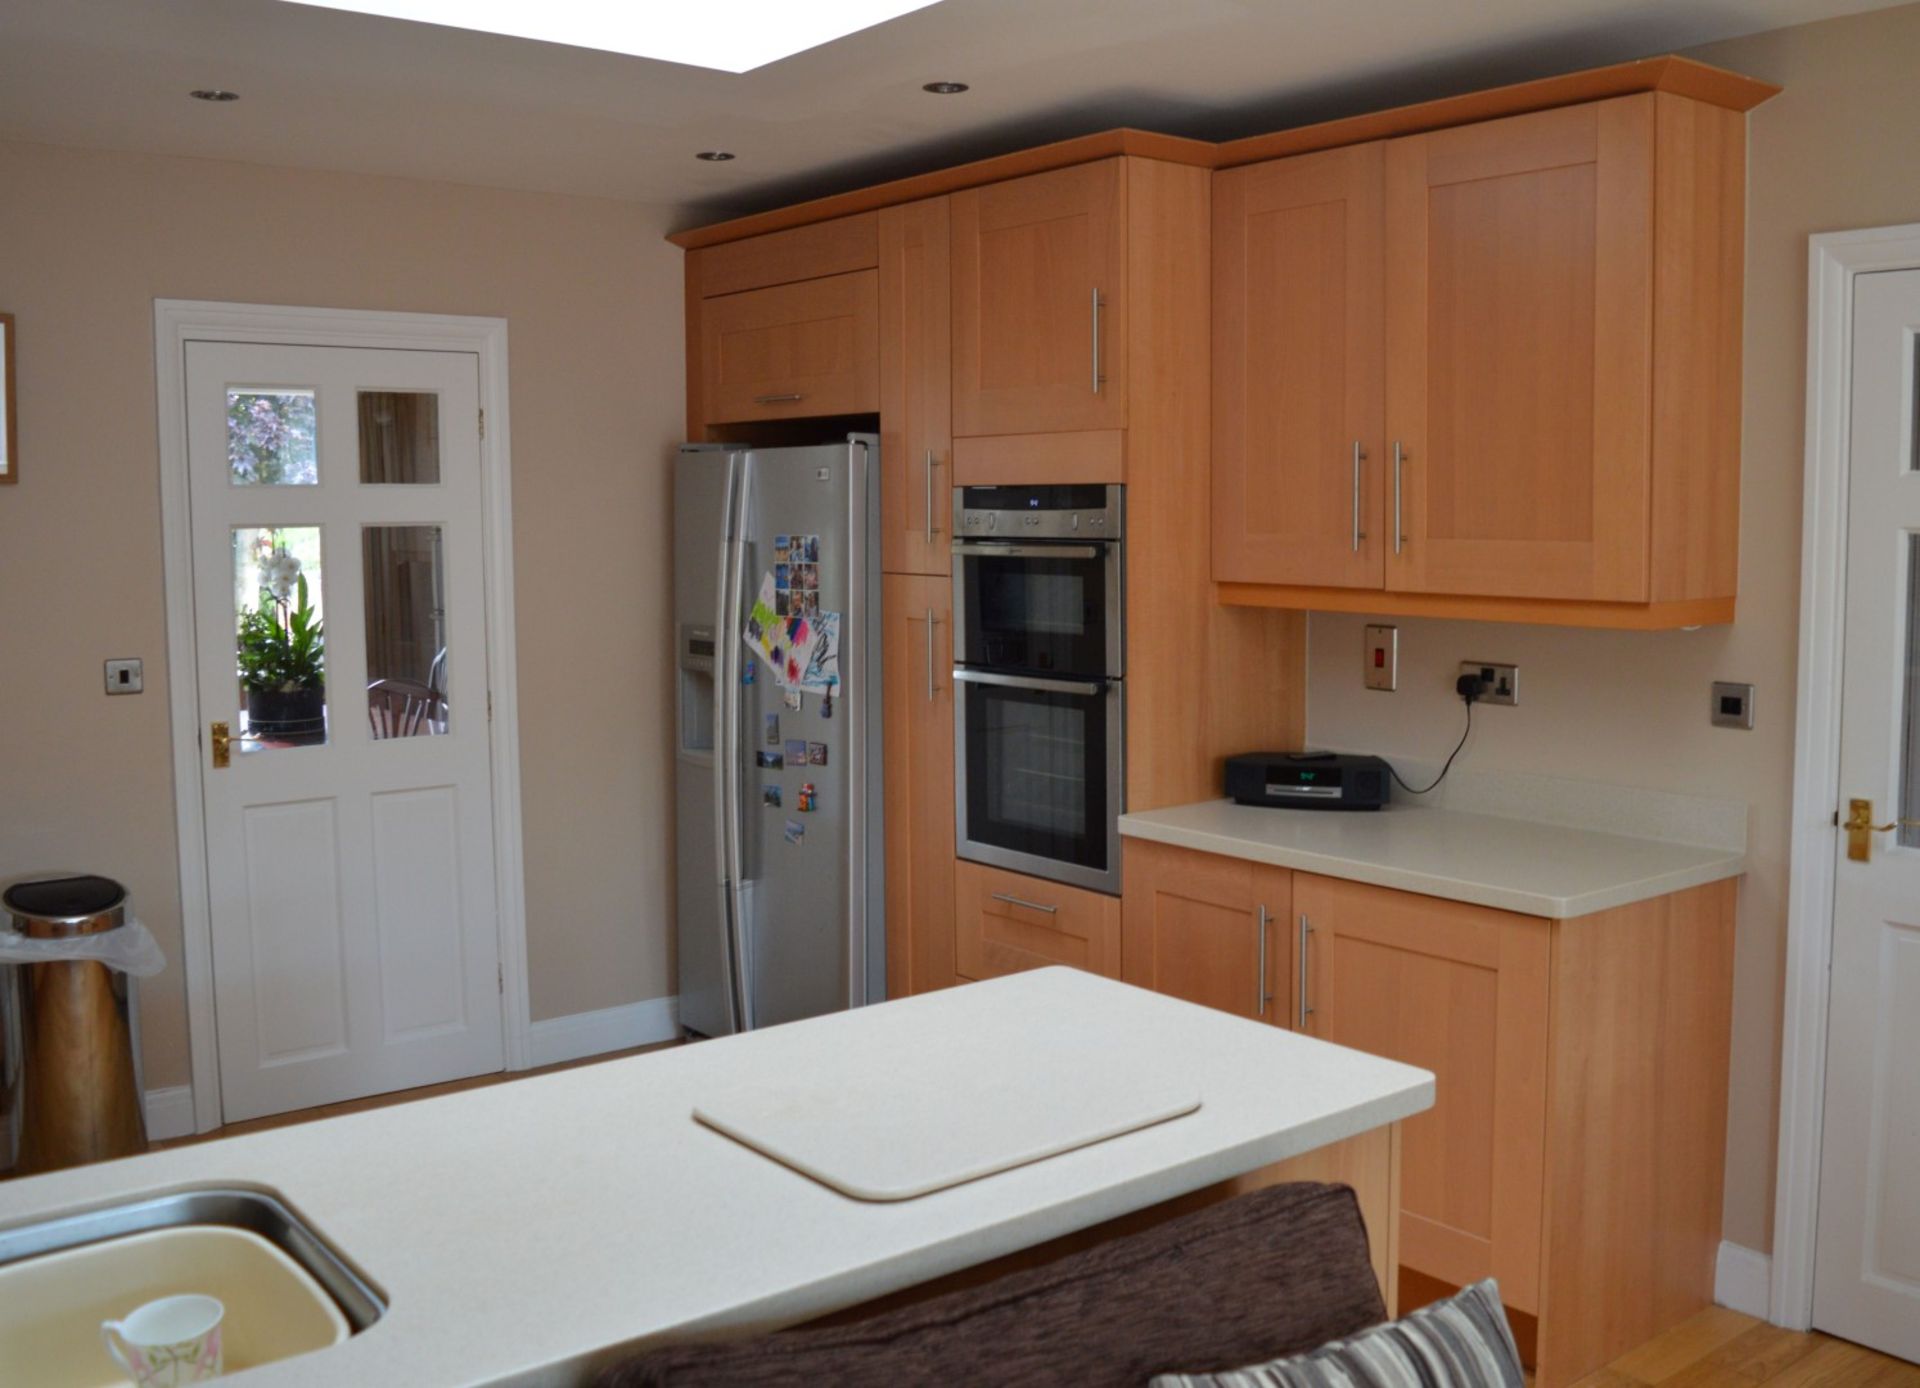 1 x Bespoke Maelstrom Solid Wood Fitted Kitchen With Corian Tops - In Excellent Condition - Neff - Image 6 of 65